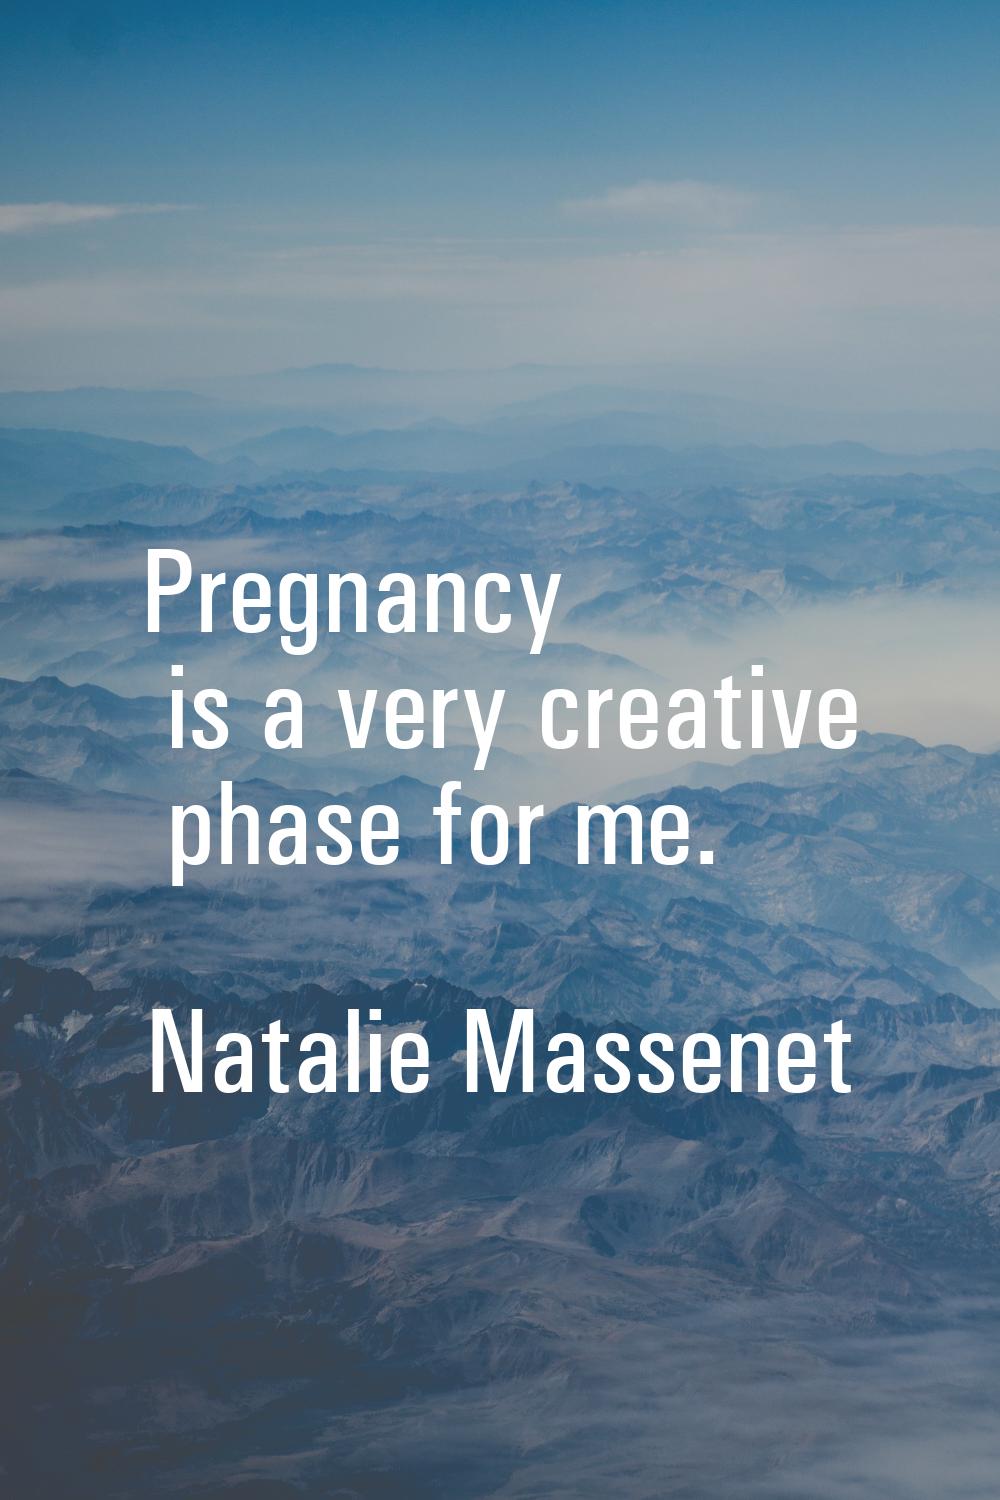 Pregnancy is a very creative phase for me.